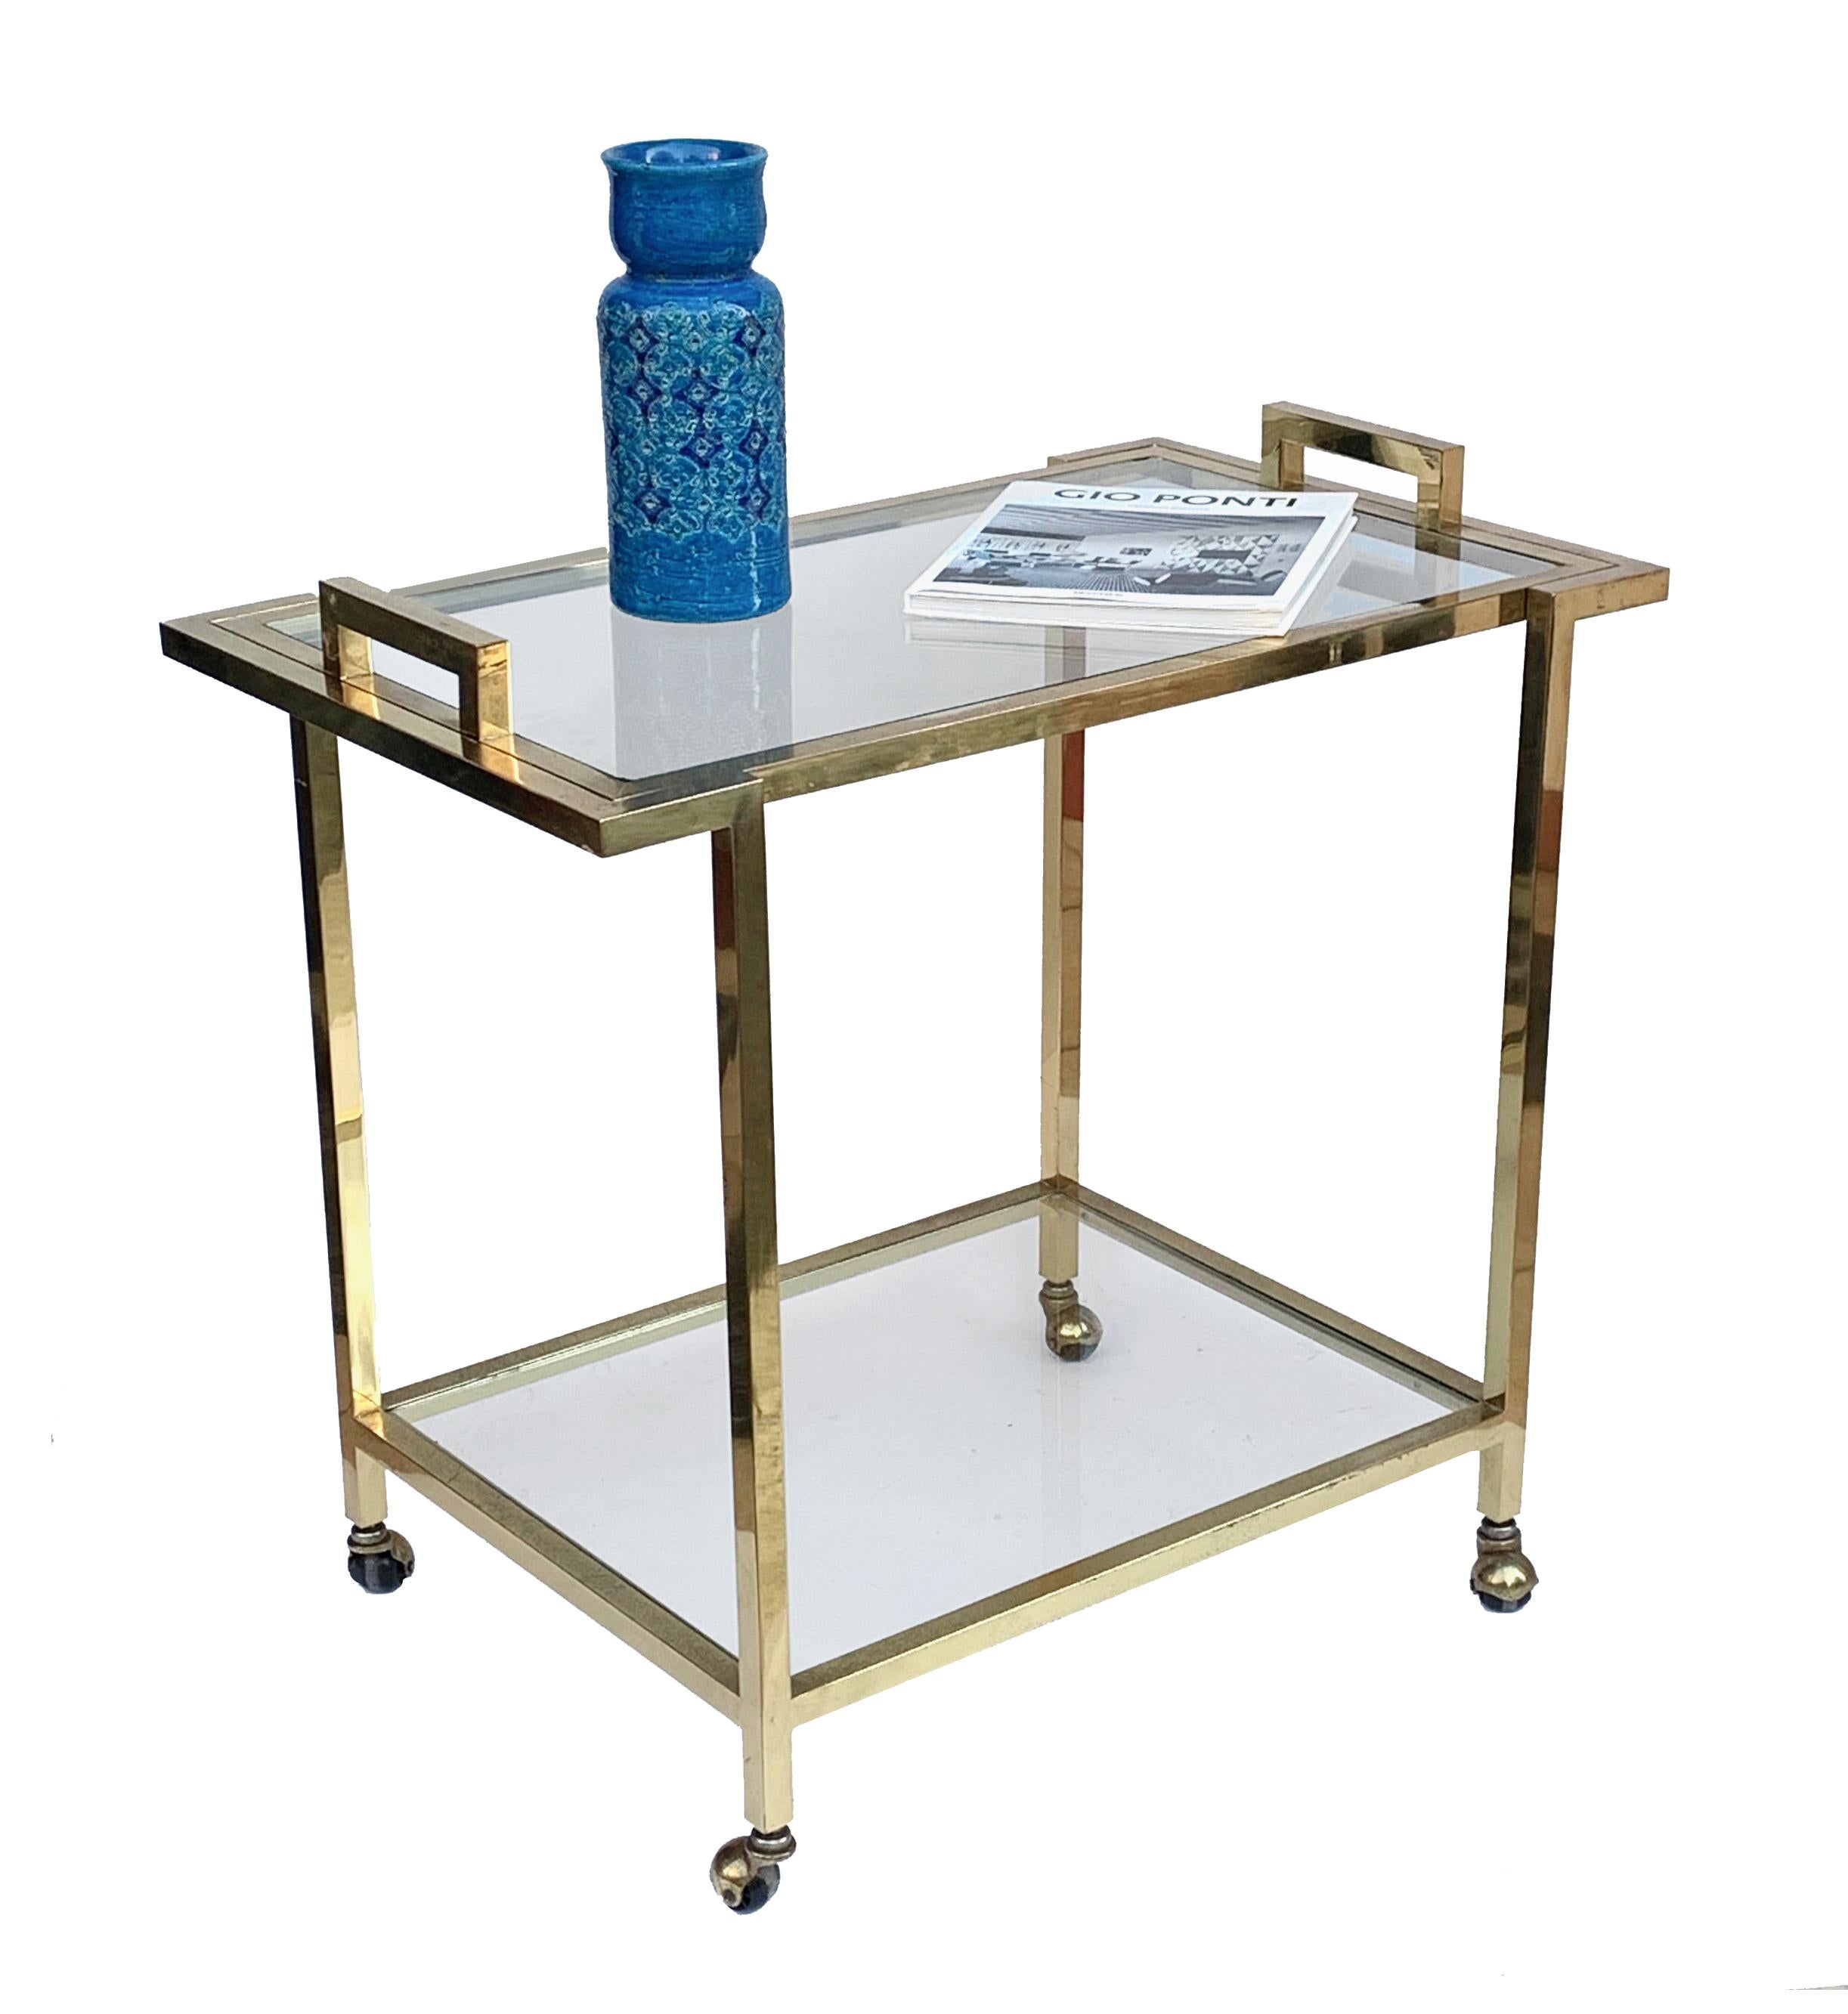 Romeo Rega style Trolley with Service Tray, Gilded Brass and Glass, Italy, 1980s For Sale 10